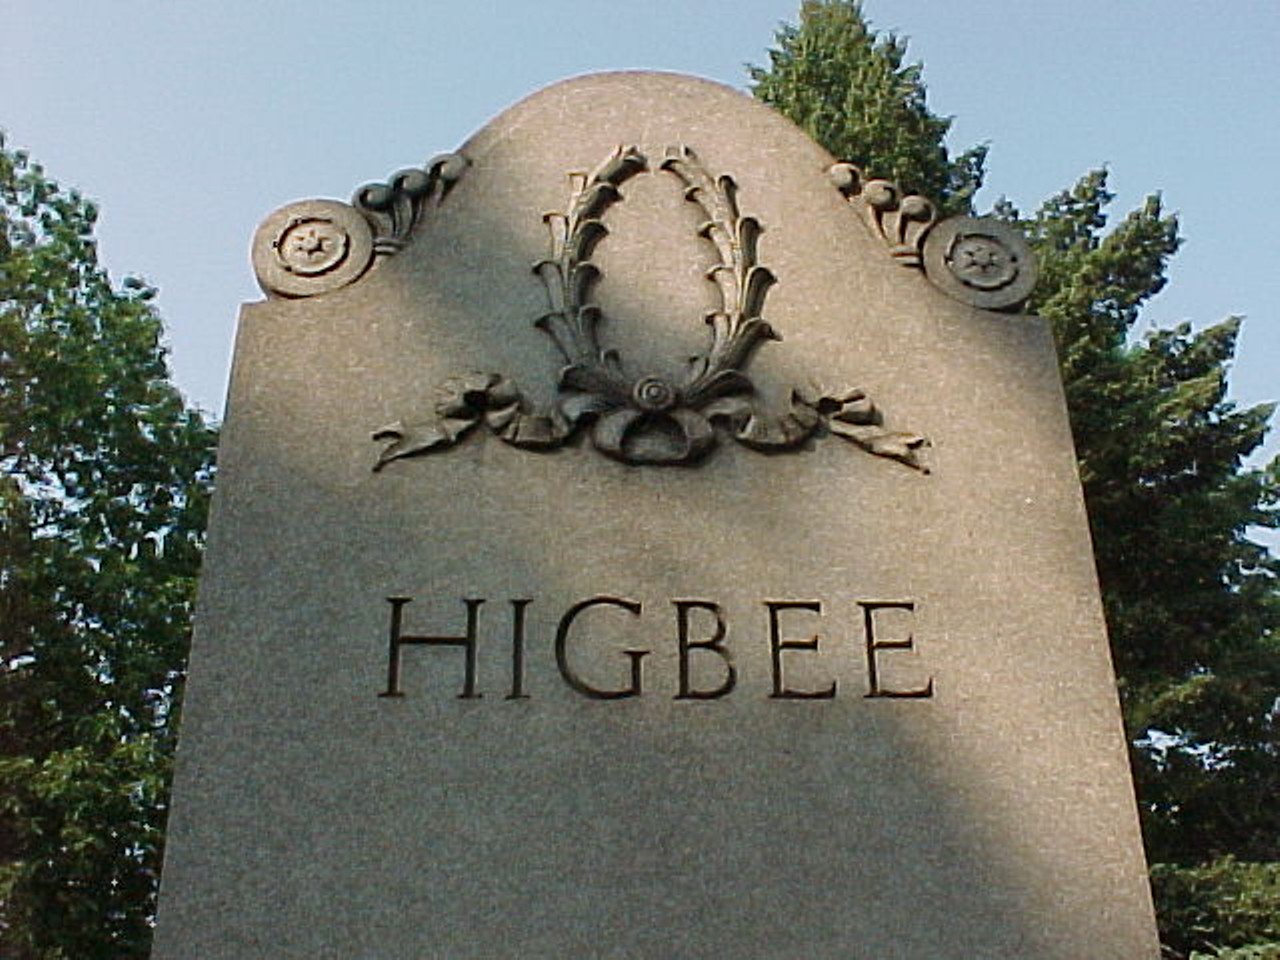 Lakeview Cemetery: The father of Higbee's -- originally Higbee & Hower Dry Goods, and ultimately Dillard's.